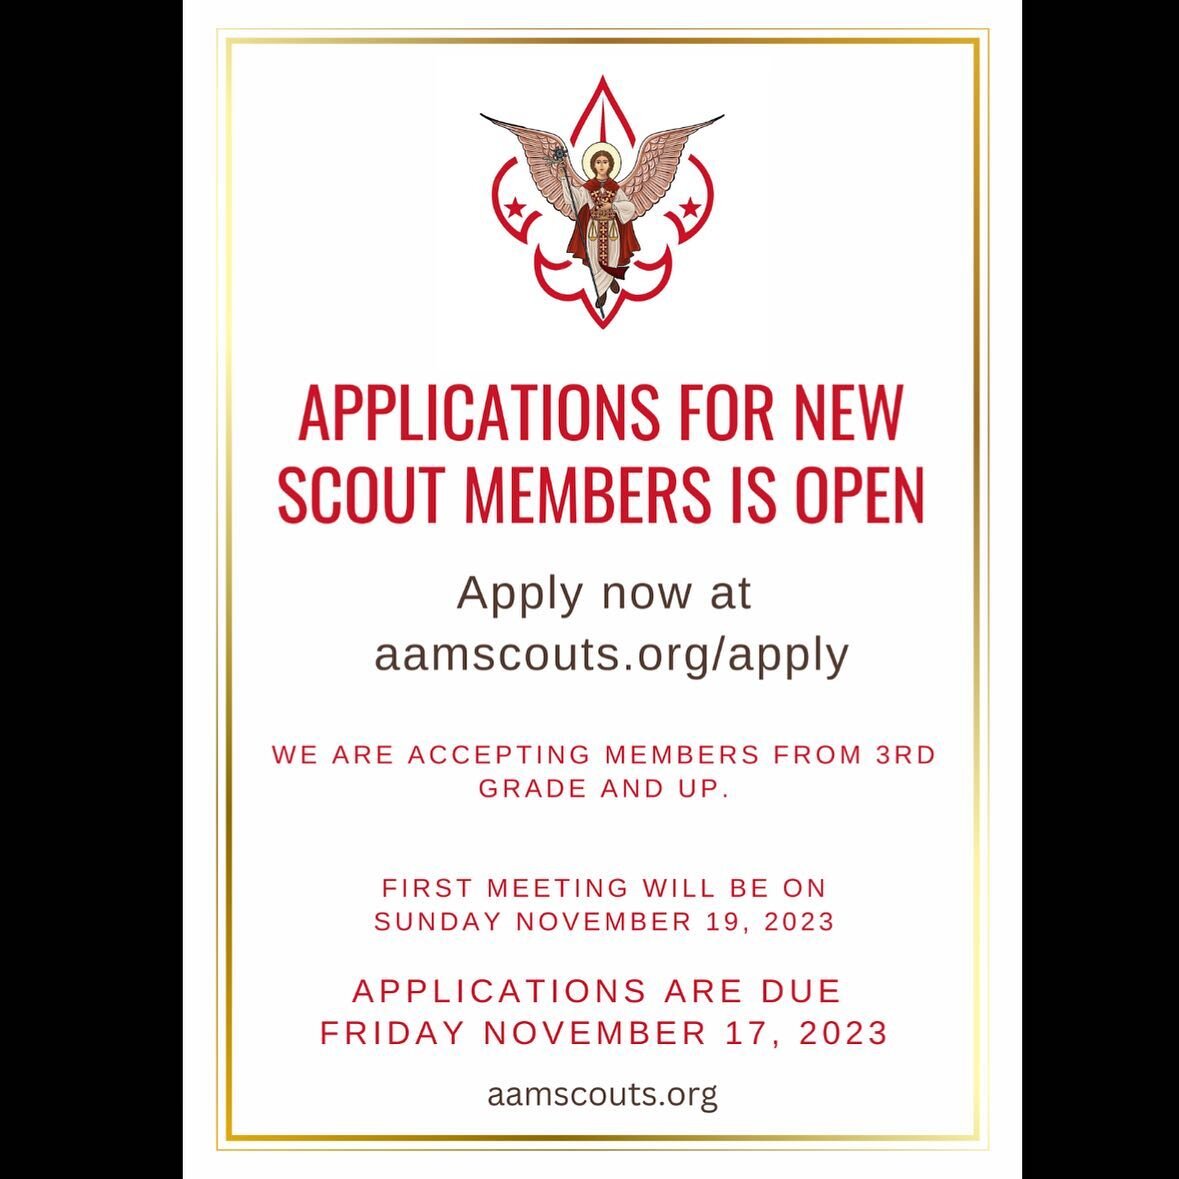 Archangel Michael Scouts are opening applications to accept new members. 😍😍 We&rsquo;re accepting members from 3rd grade and up. Deadline to register is November 17. 
The first meeting will be on Sunday November 19 

Apply today using this link: ht